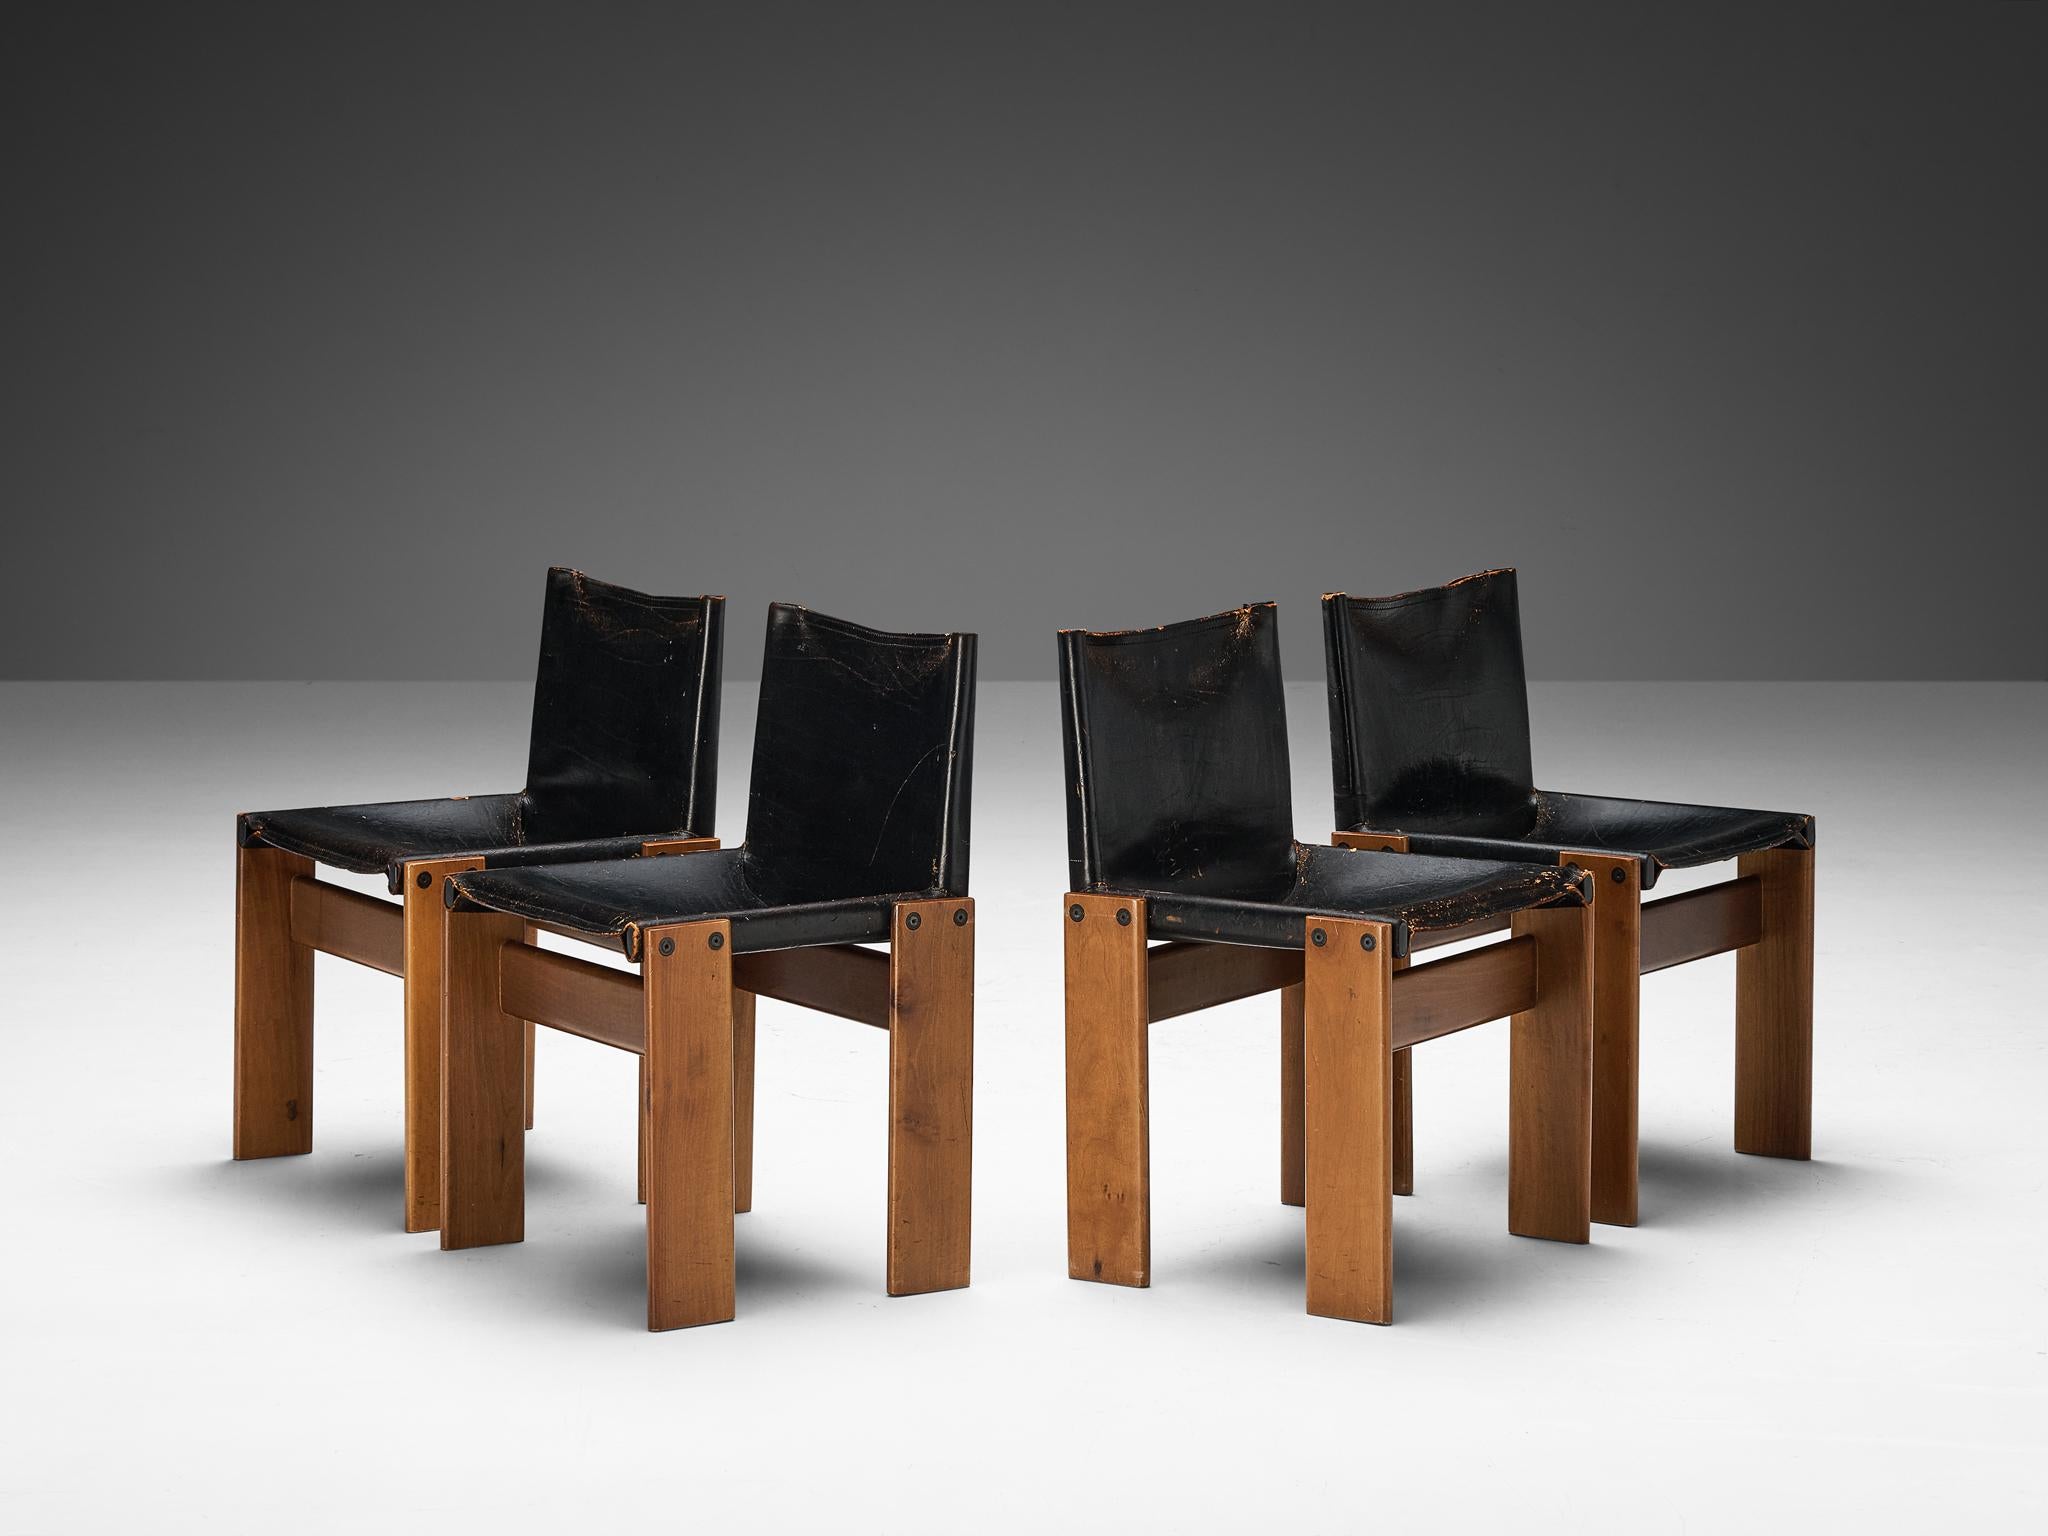 Afra & Tobia Scarpa for Molteni, set of four 'Monk' dining chairs, walnut, black leather, Italy, 1974.

Set of four 'Monk' chairs by Italian designers Afra & Tobia Scarpa. The black leather forms a striking combination with the warm tone of the